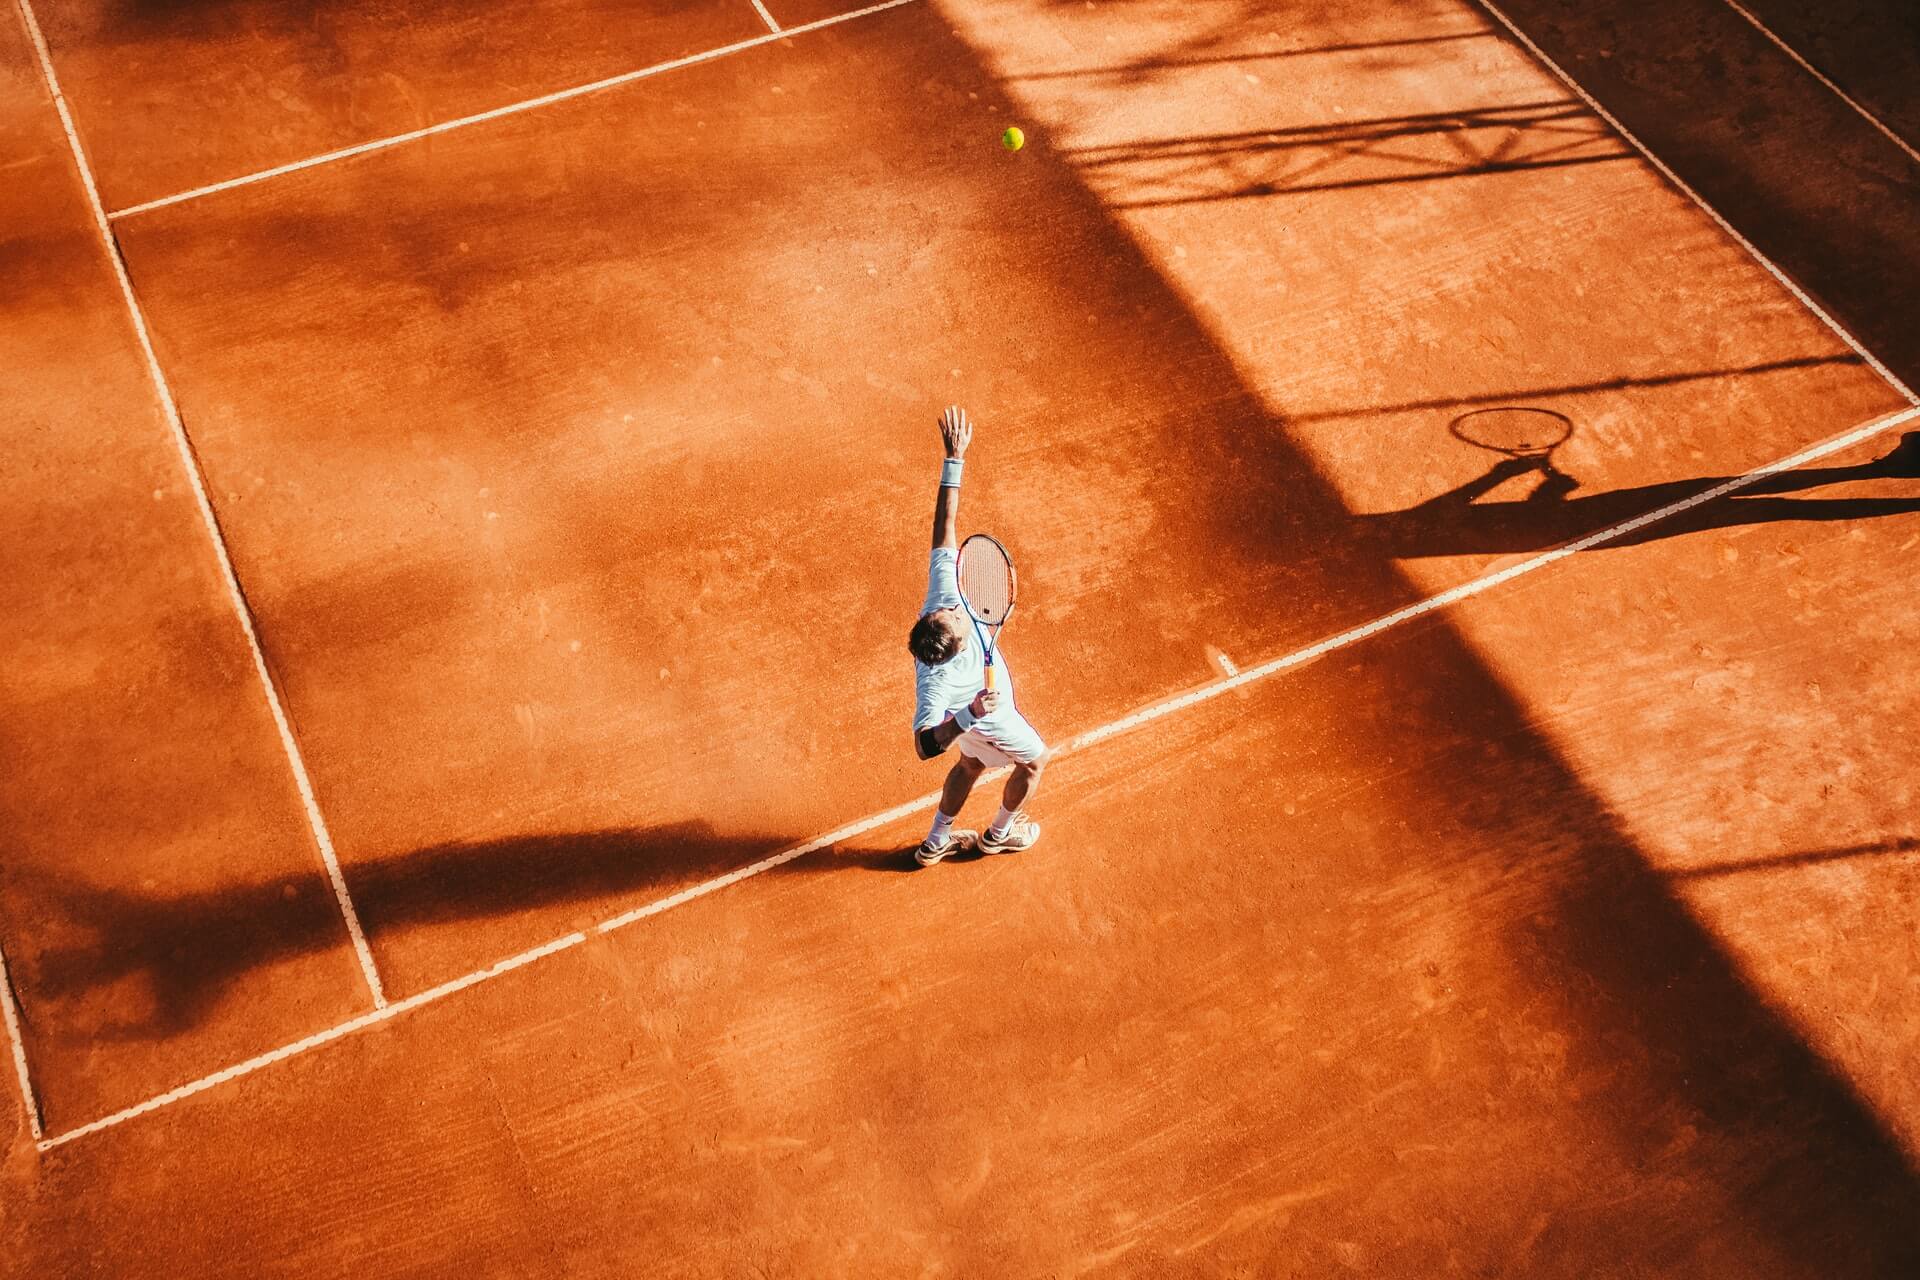 Things To Know About The French Open